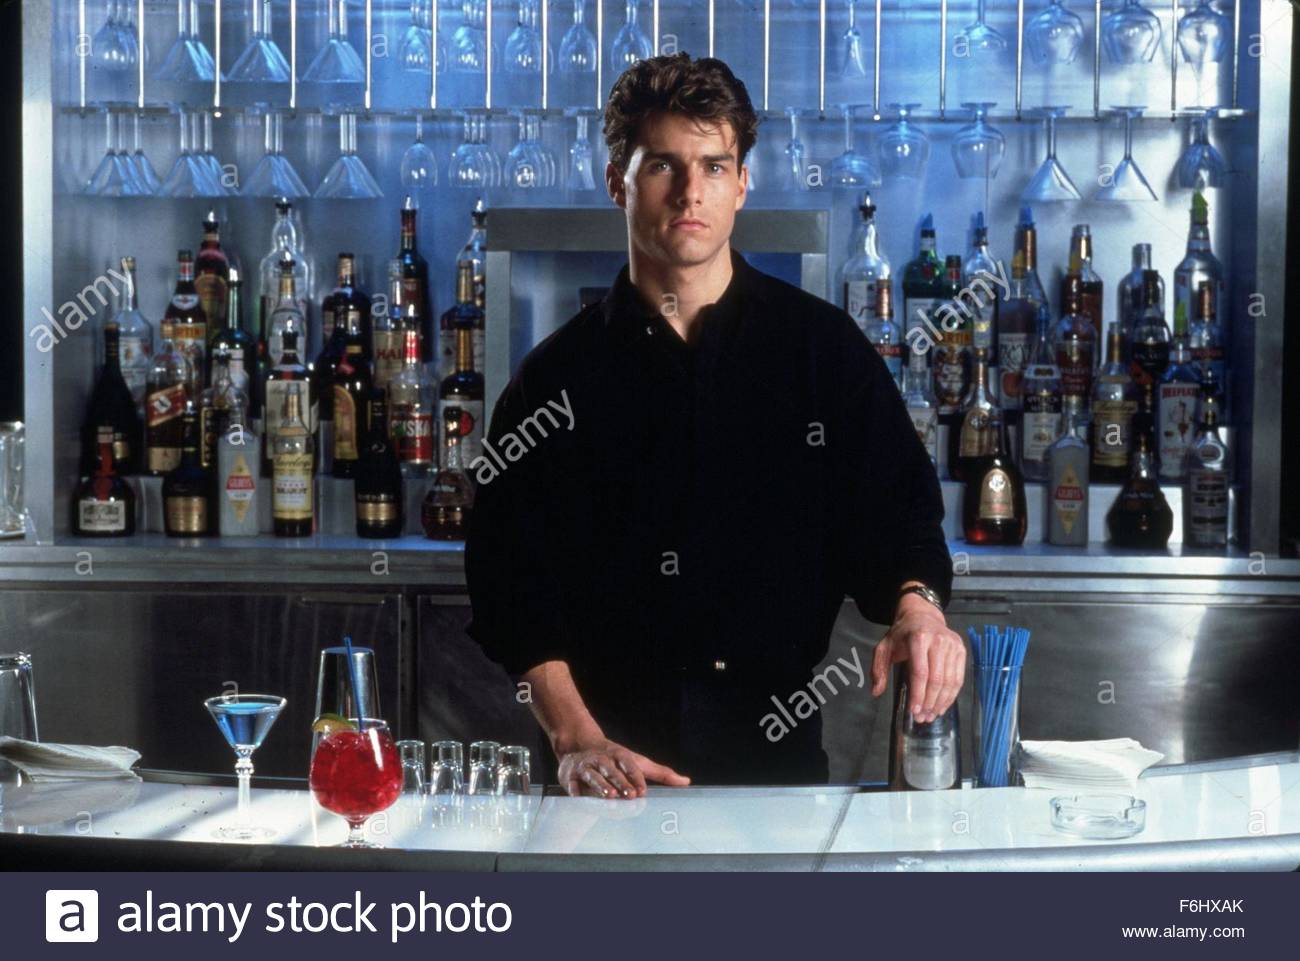 Cocktail Tom Cruise Stock Photos Cocktail Tom Cruise Stock